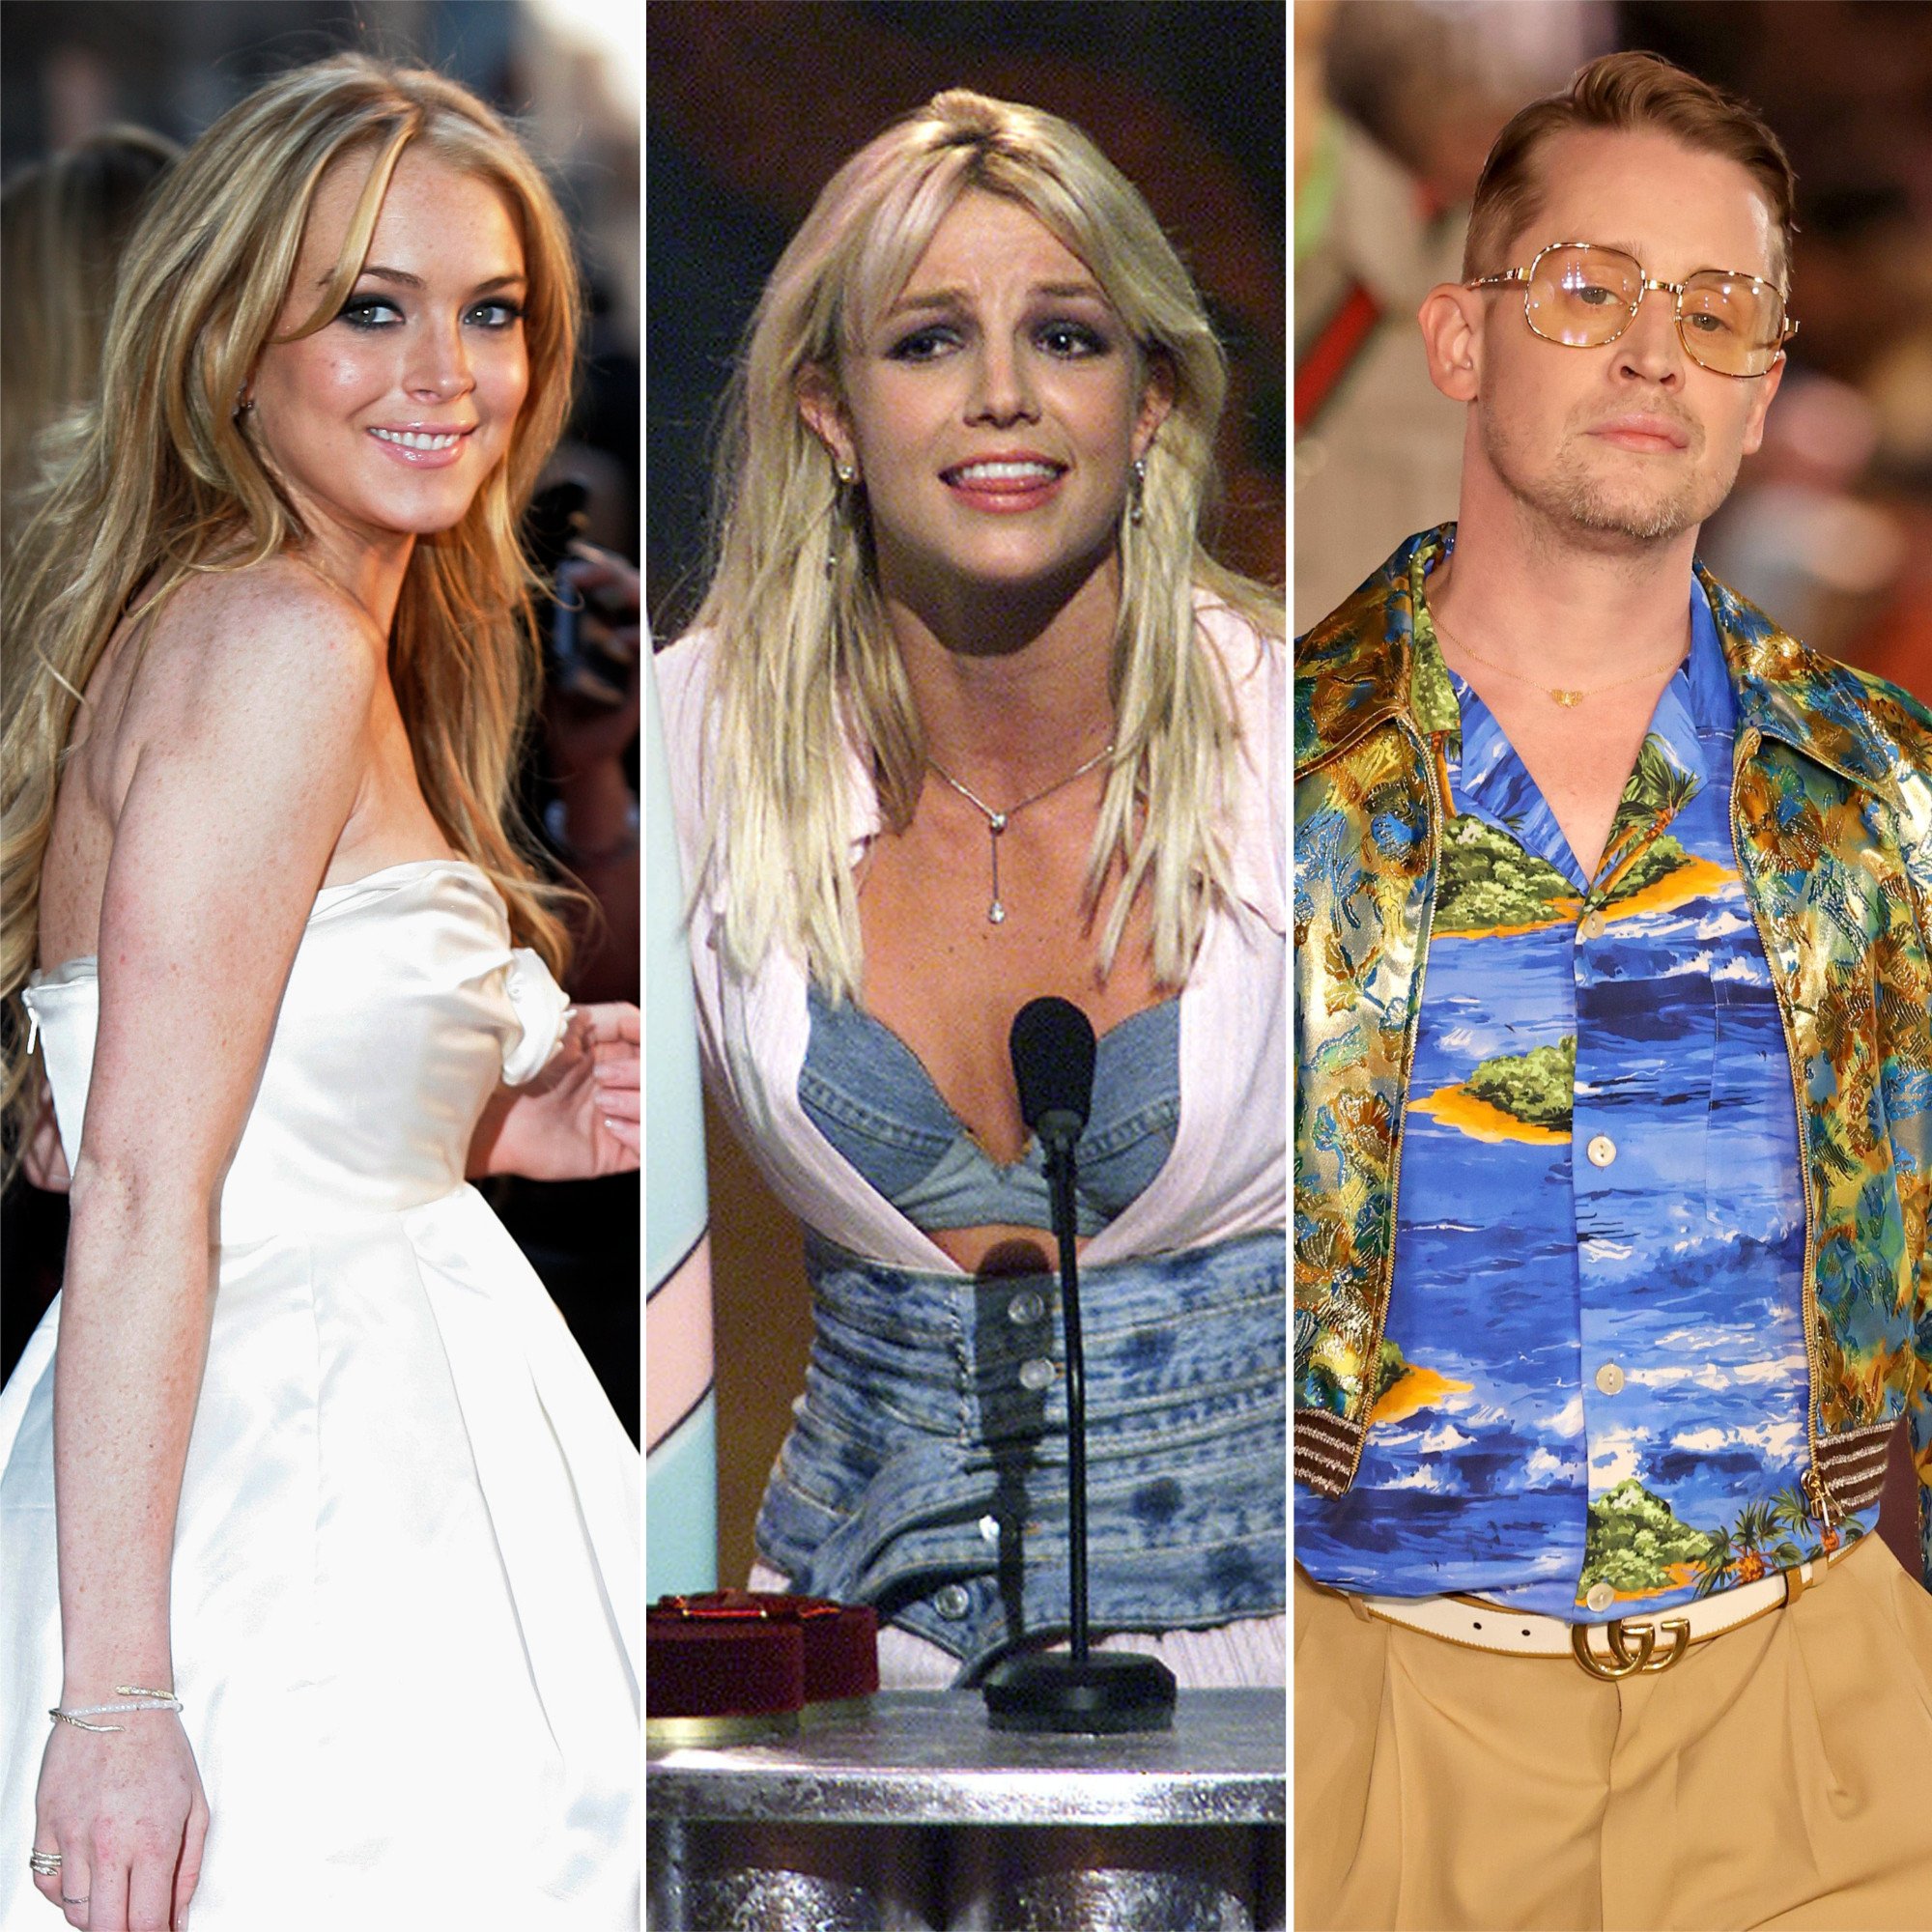 Lindsay Lohan, Britney Spears and   Macaulay Culkin are among the most famous child stars to survived difficulties stemming from early fame. Photo: AP; Reuters; Getty Images/AFP